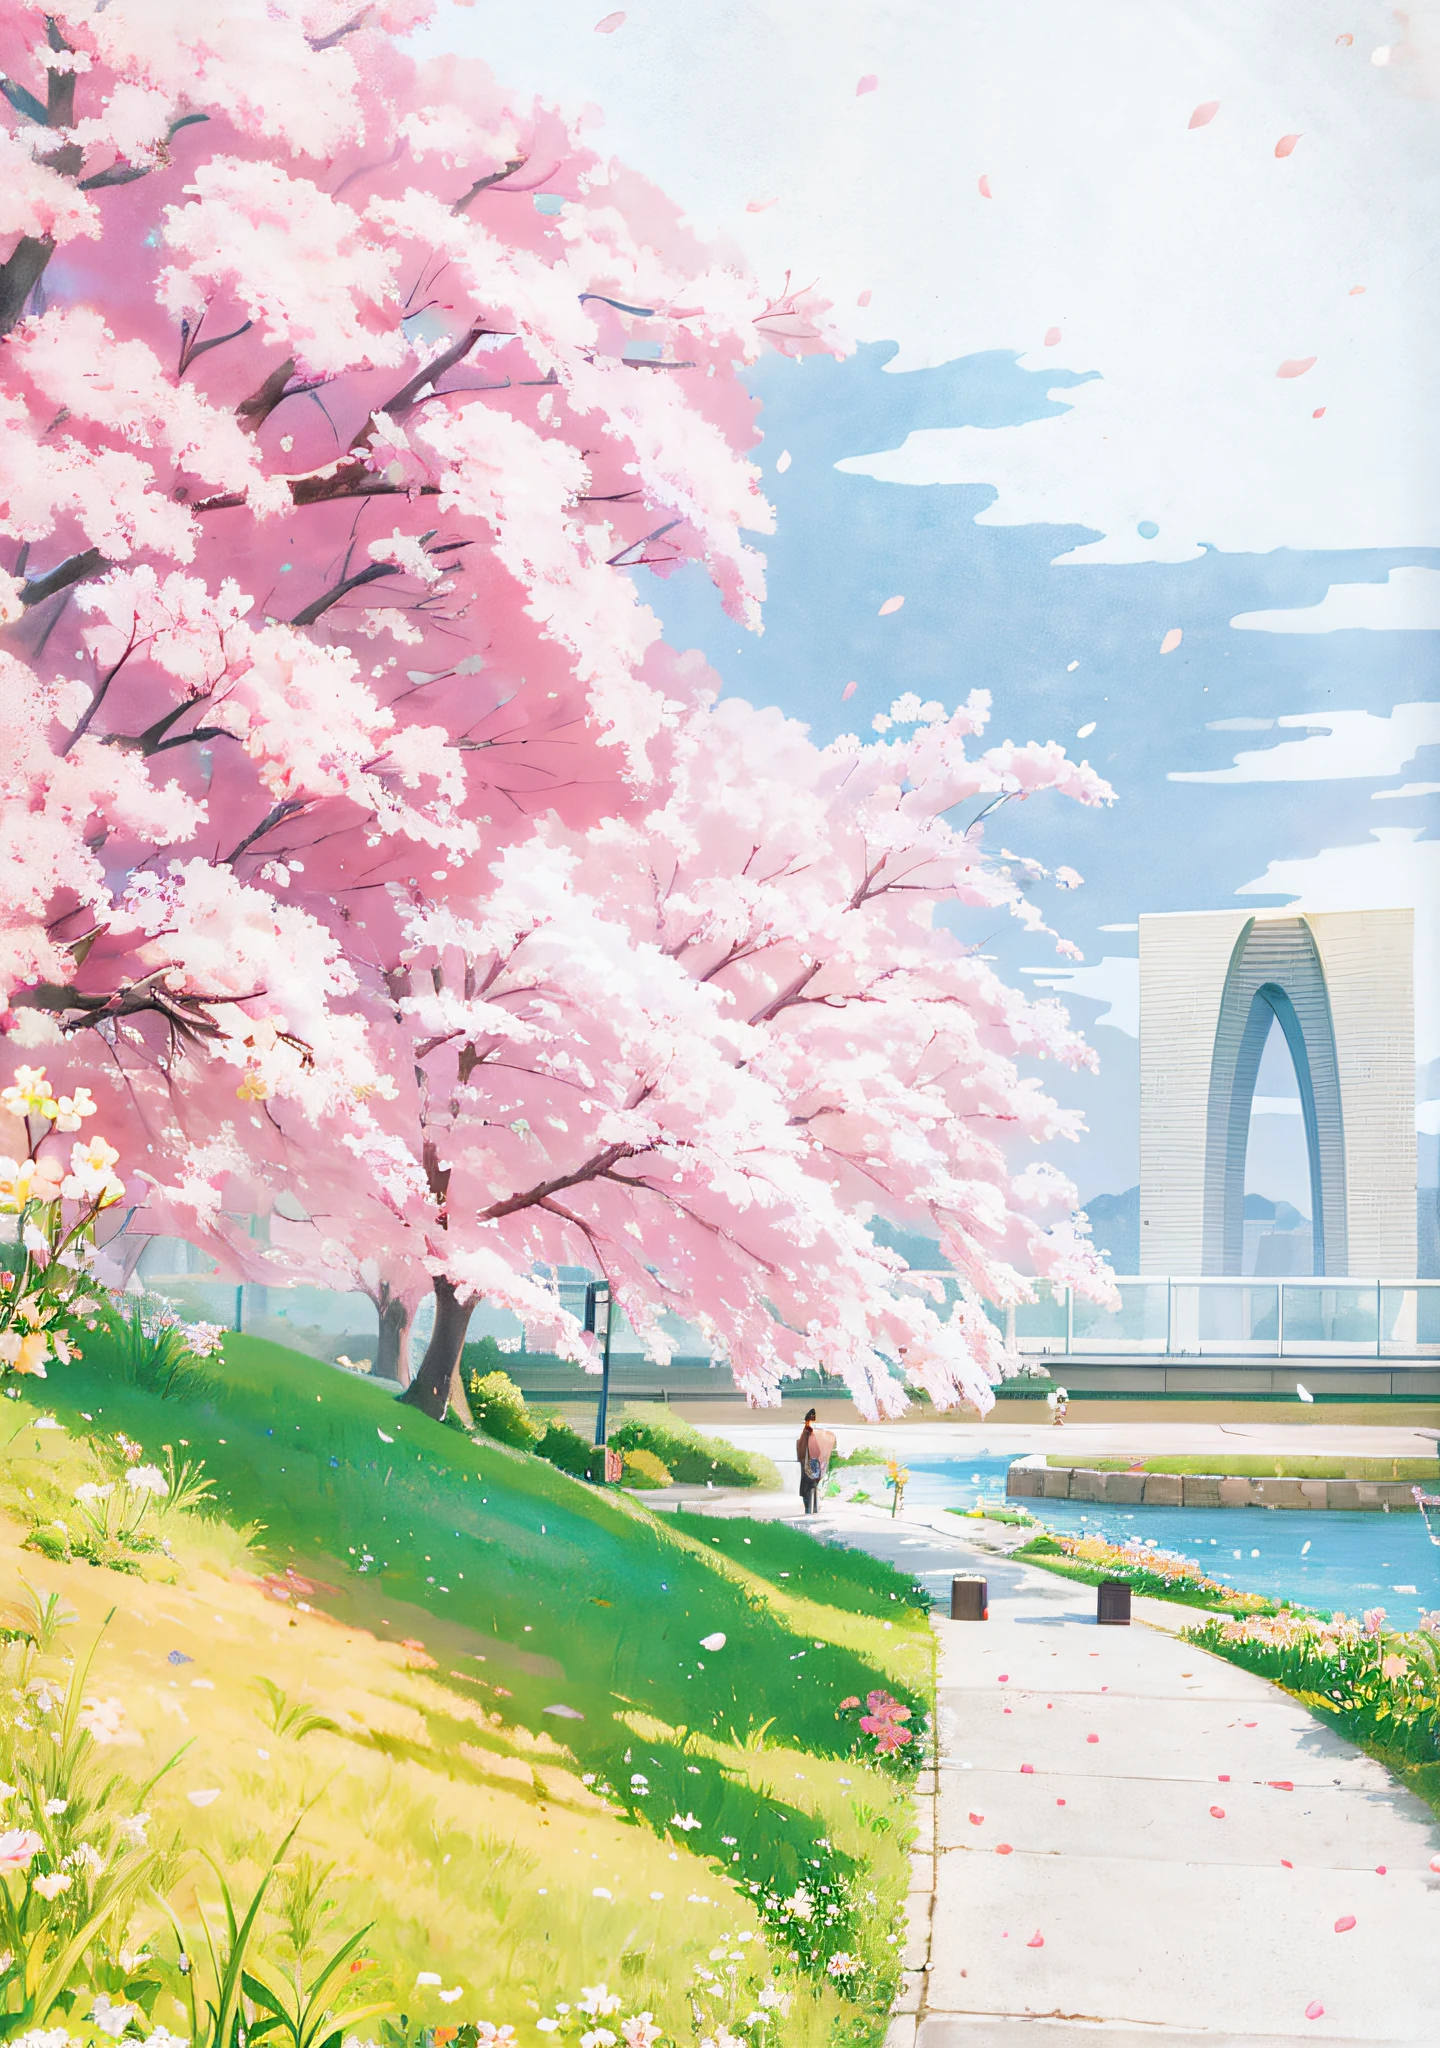 painting of a person walking on a path near a river, a beautiful artwork illustration, anime countryside landscape, scenery artwork, anime landscape, in style of makoto shinkai, cherry blossoms in the wind, anime beautiful peace scene, Anime background art, beautiful anime scenery, under the cherry blossom tree, makoto shinkai art style, blossoming path to heaven